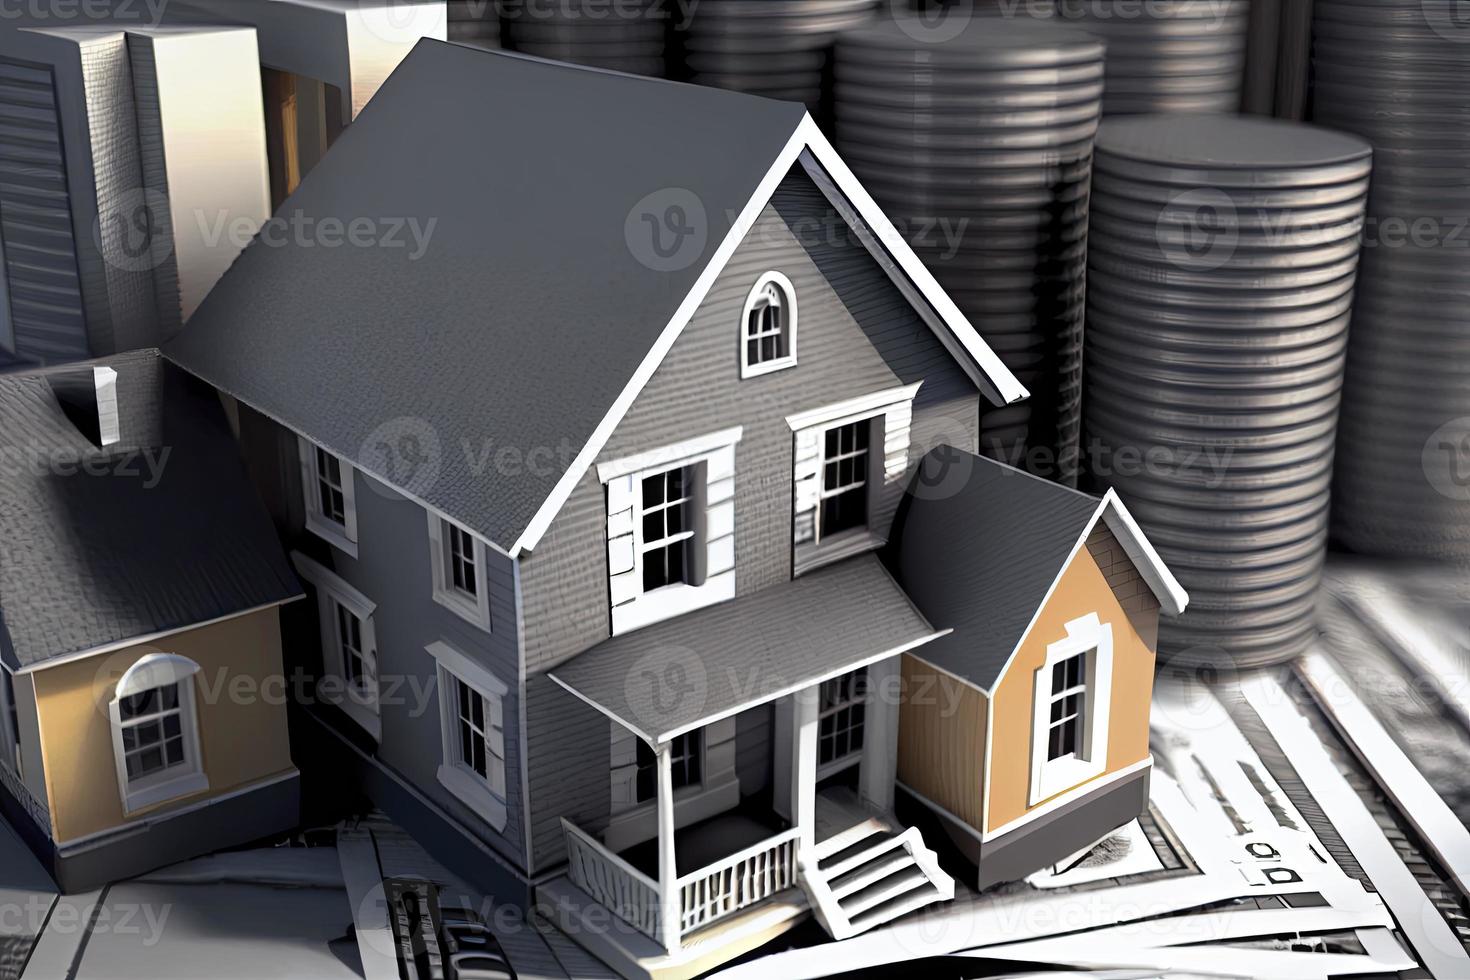 Saving money for real estate with buying a new home and loan for prepare in the future concept photo